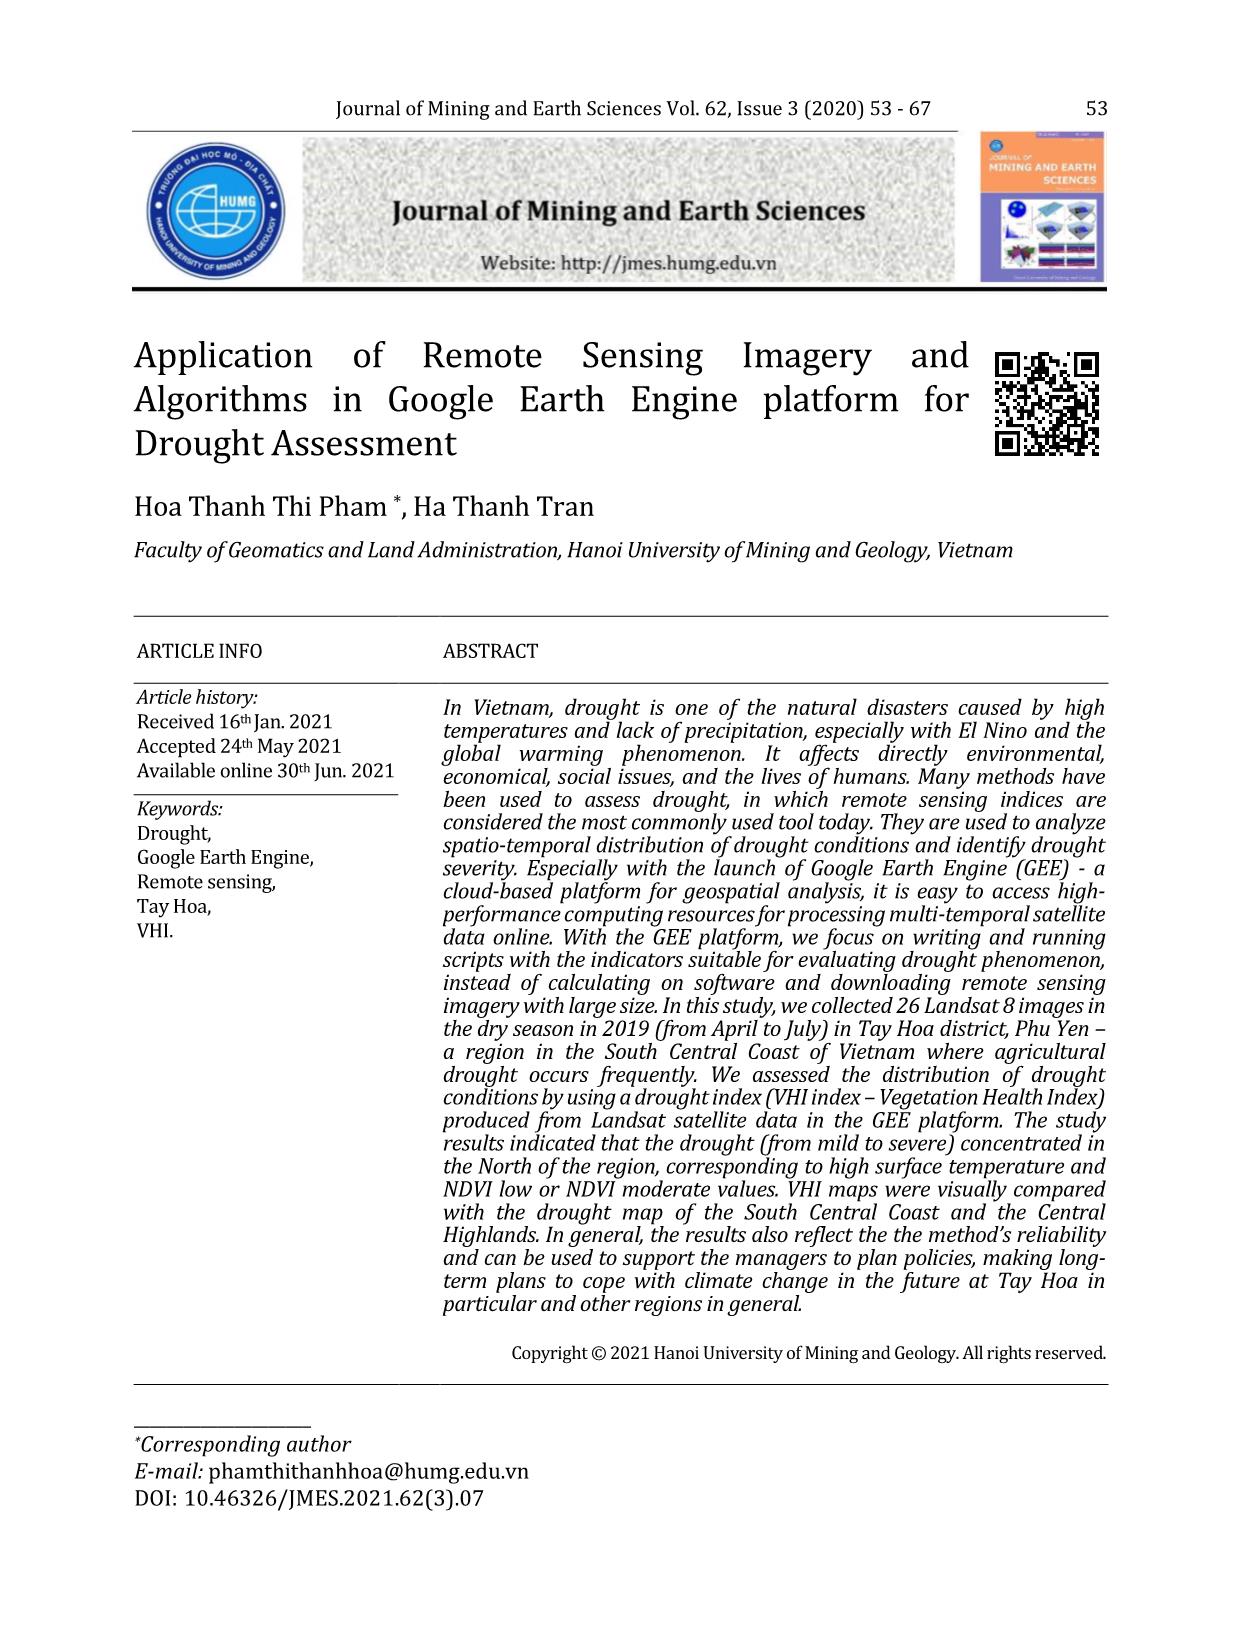 Application of remote sensing imagery and algorithms in Google earth engine platform for drought assessment trang 1